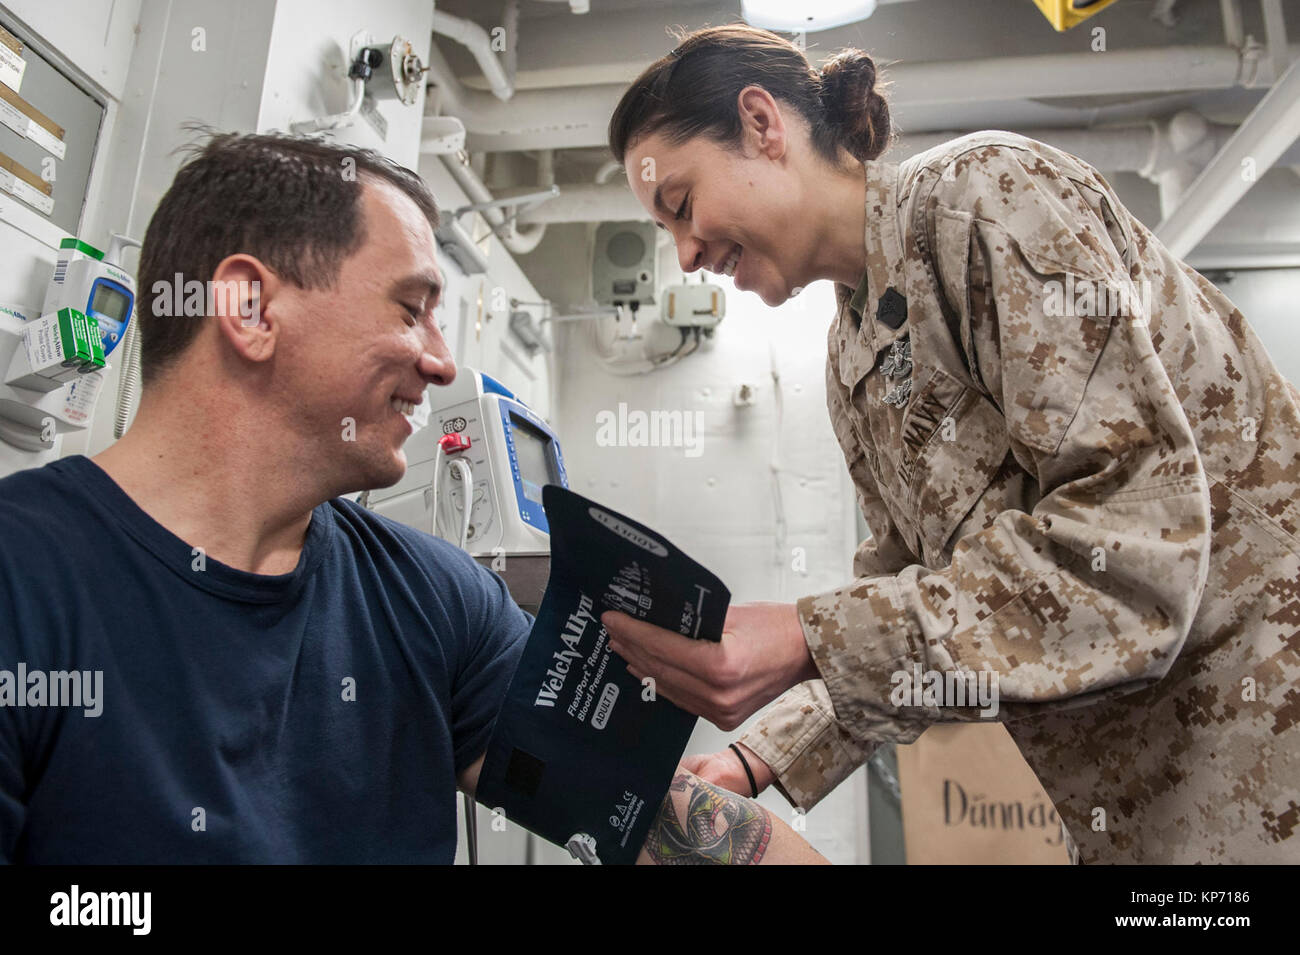 Hospital Corpsman 1st Class Tonya Jury, a native of Golden, Colo., assigned to the health services department aboard the amphibious assault ship USS America (LHA 6), checks the blood pressure of Chief Hospital Corpsman Andy Warren, a native of Thomasville, Ga., in the main battle dressing station. America is the flagship for the America Amphibious Ready Group and, with the embarked 15th Marine Expeditionary Unit, is deployed to the U.S. 5th Fleet area of operations in support of maritime security operations to reassure allies and partners and preserve the freedom of navigation and the free flo Stock Photo